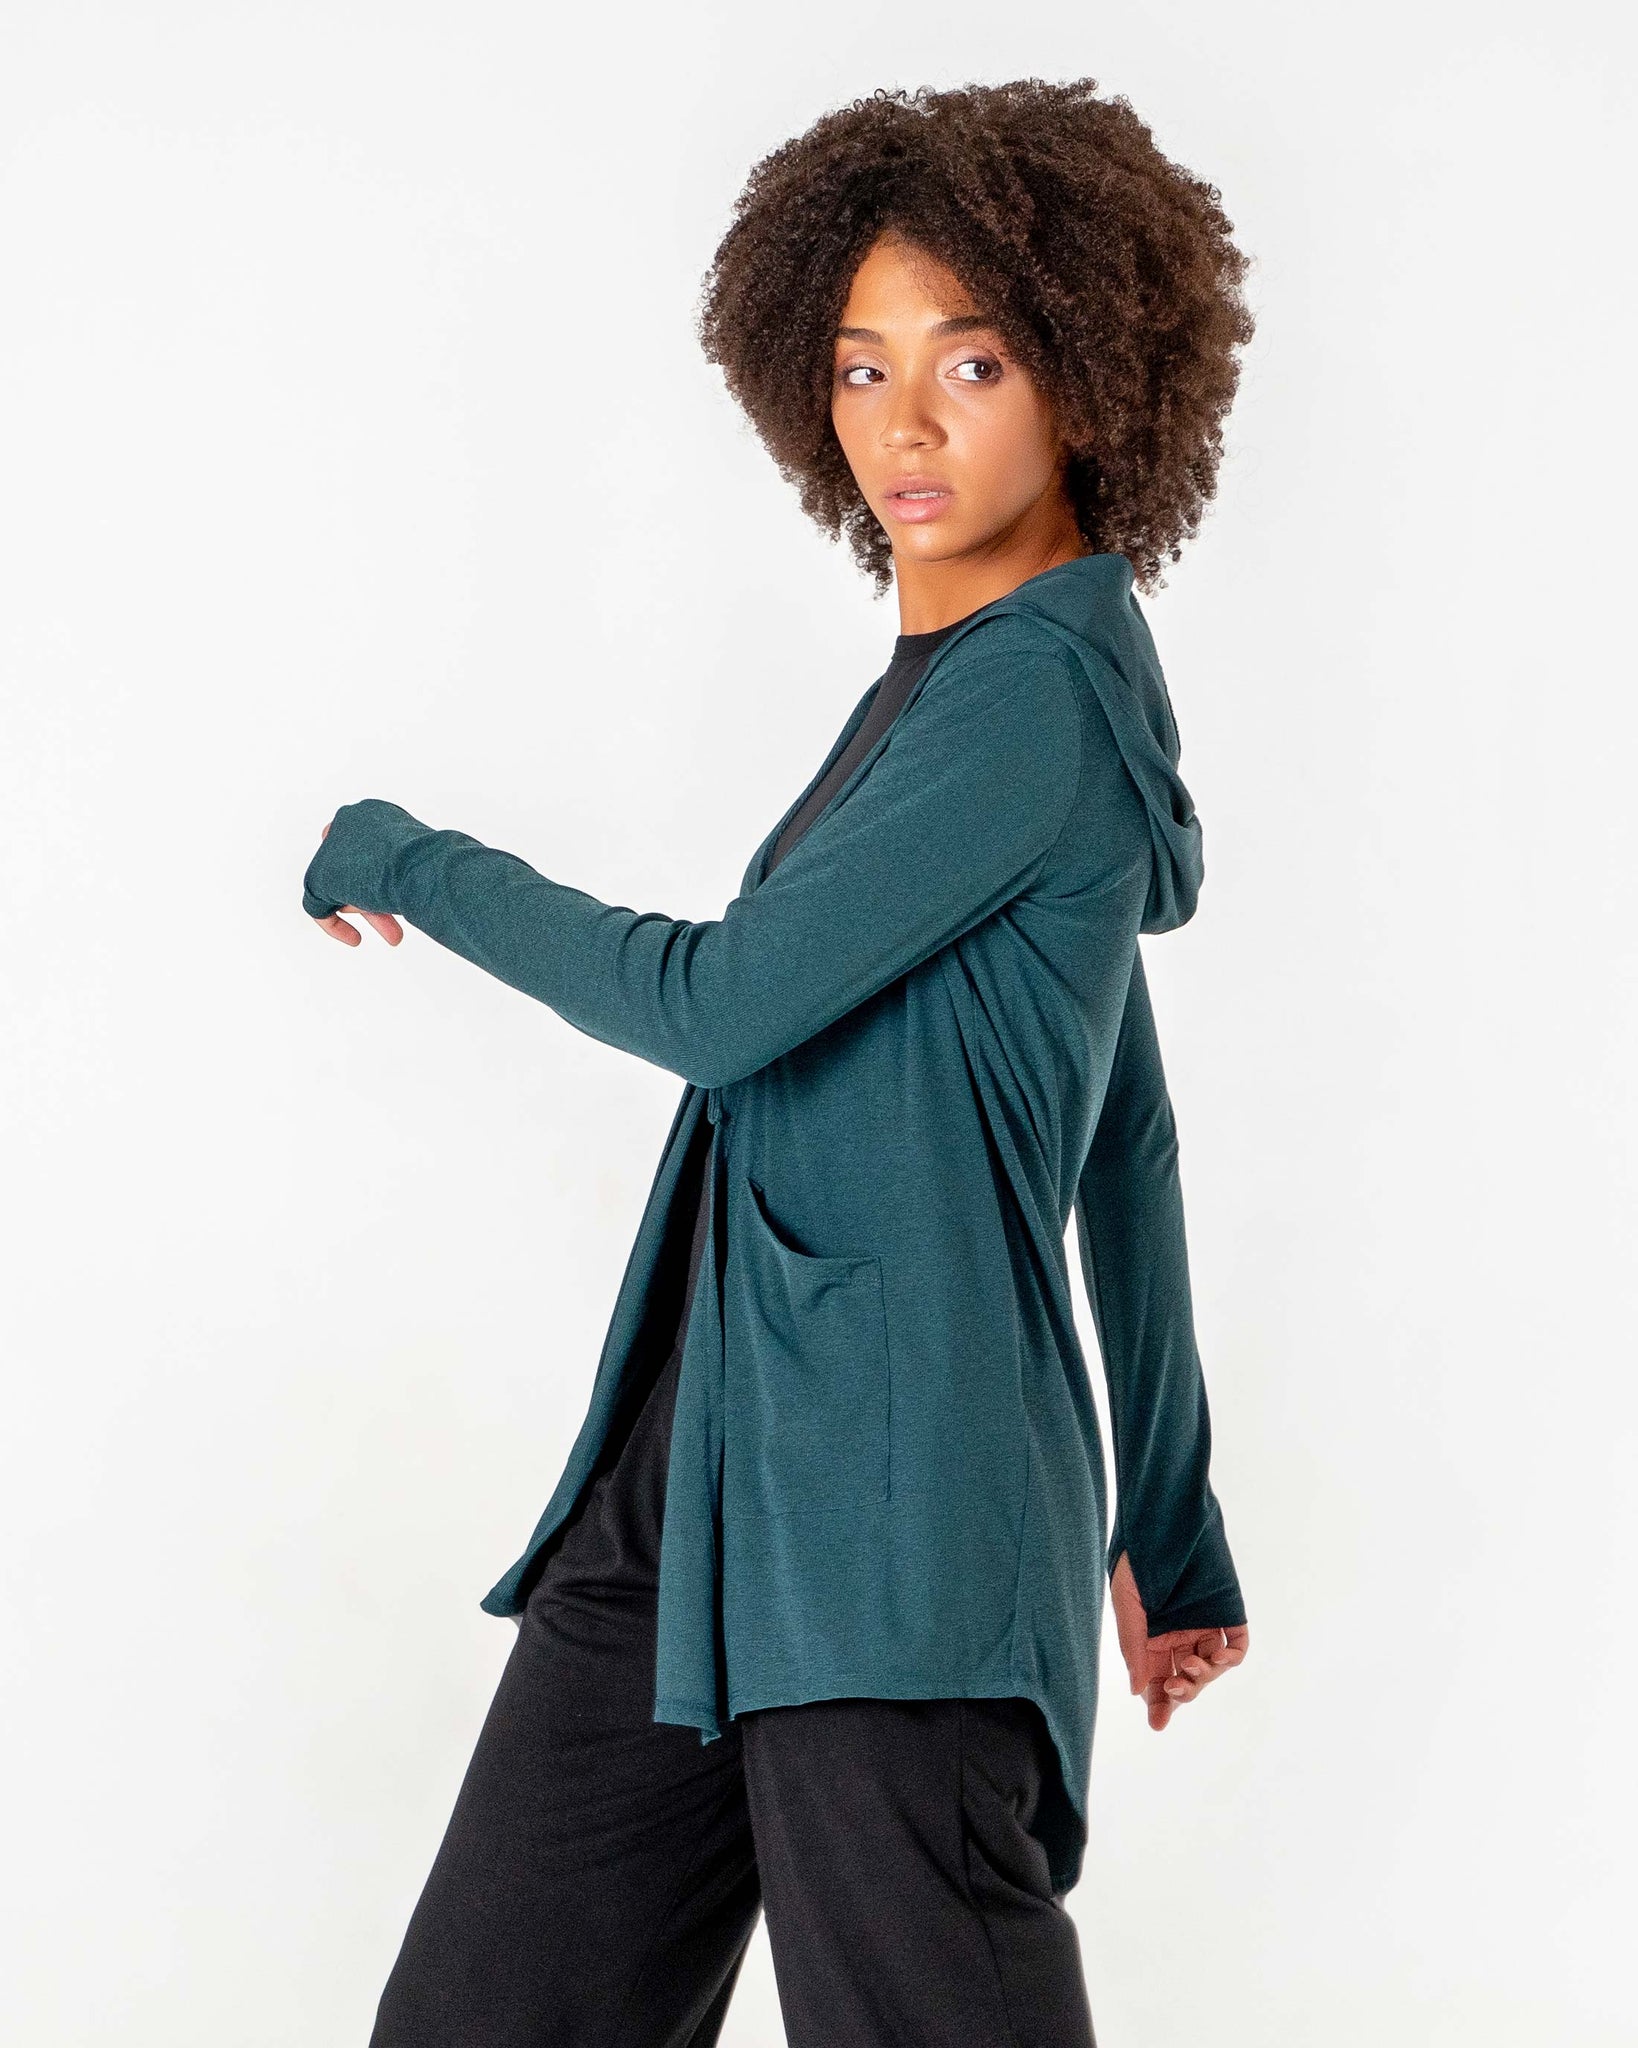 Move It Cardigan in emerald green by Veil Garments. Modest activewear collection.